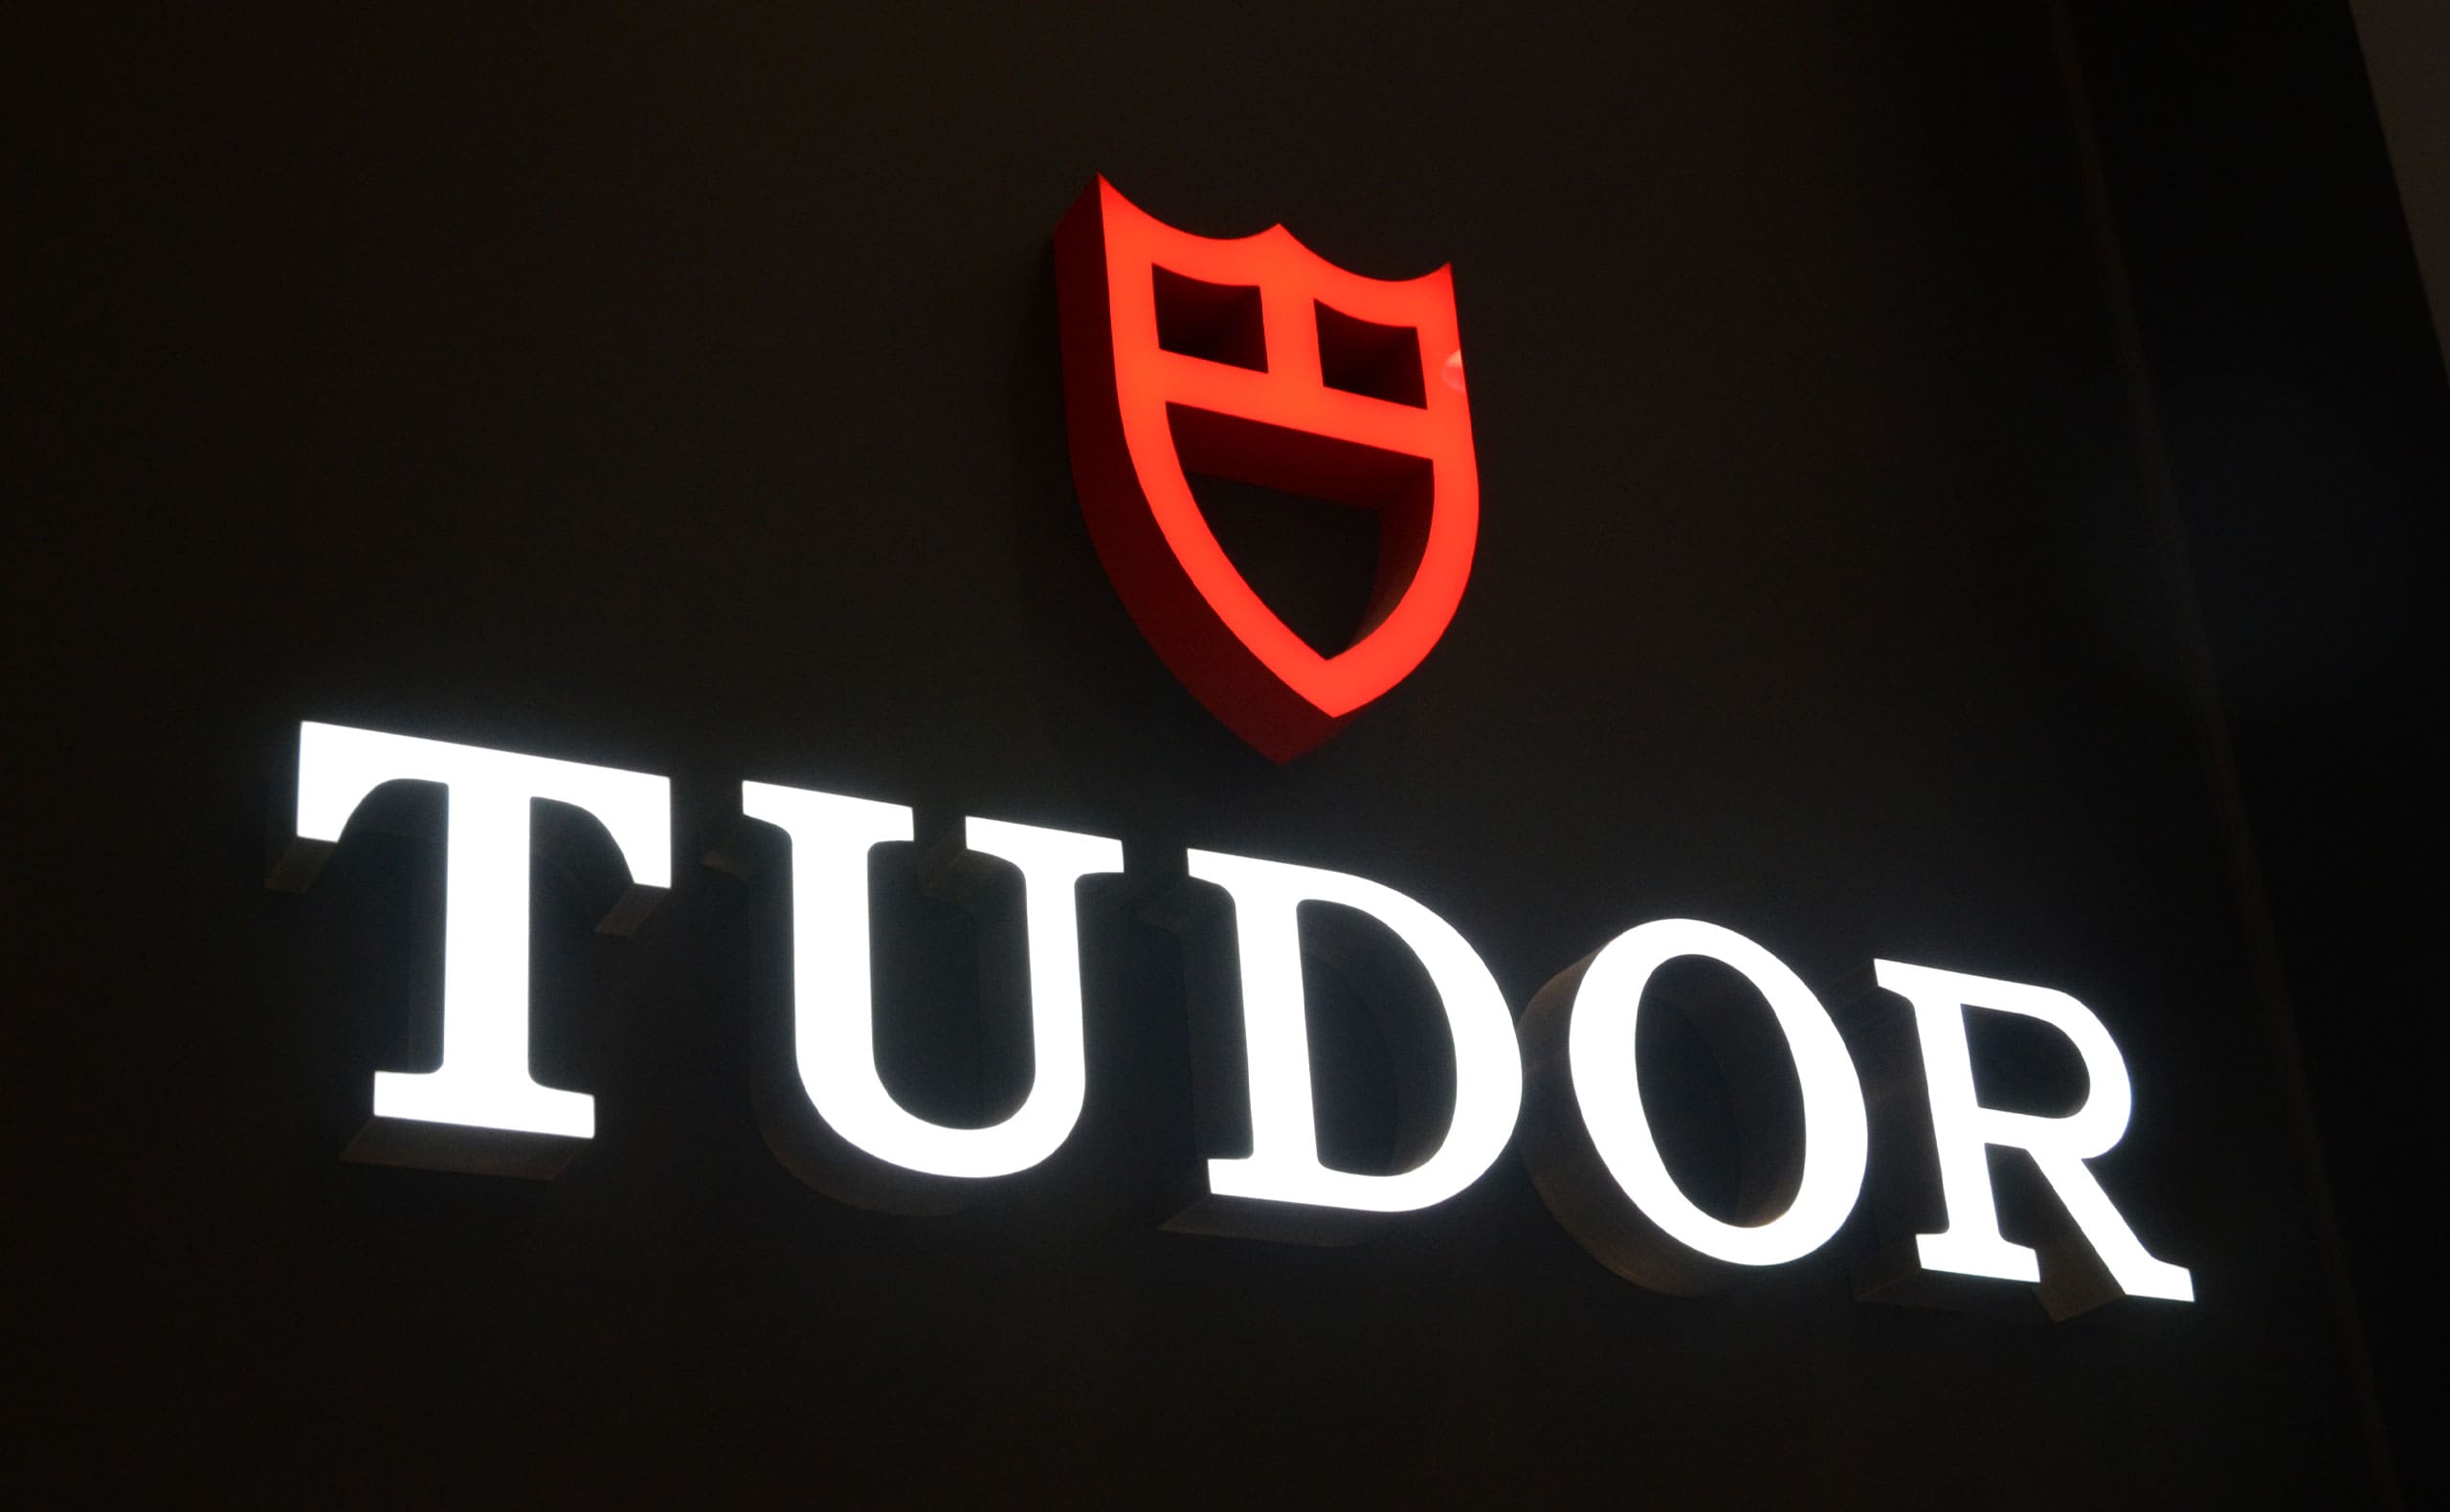 Metal Front Lit Trimless Channel Letters For Tudor